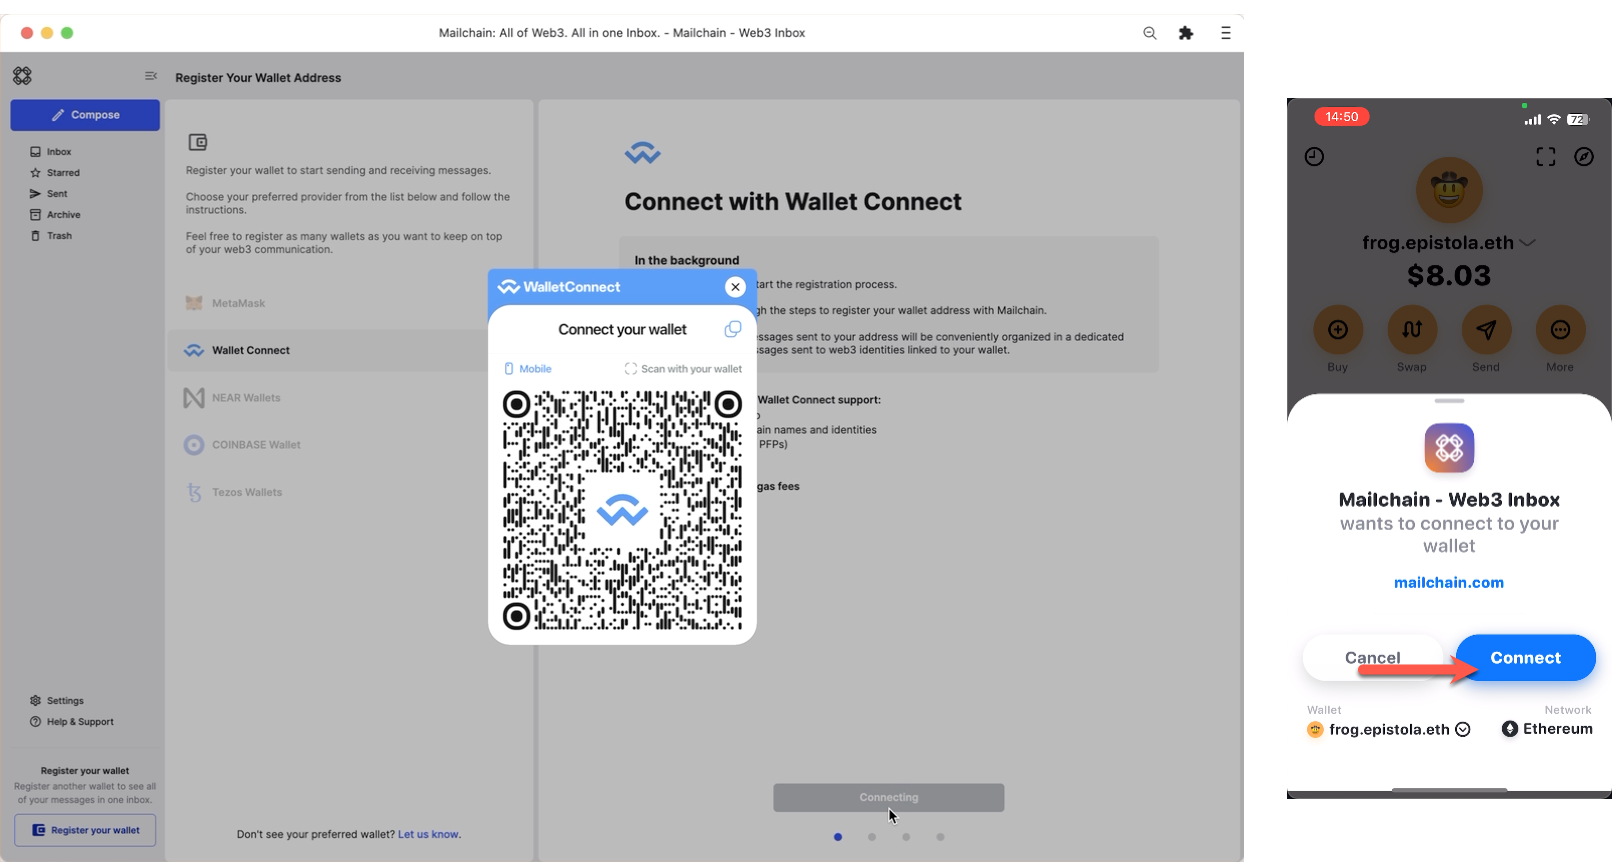 select the wallet address to register